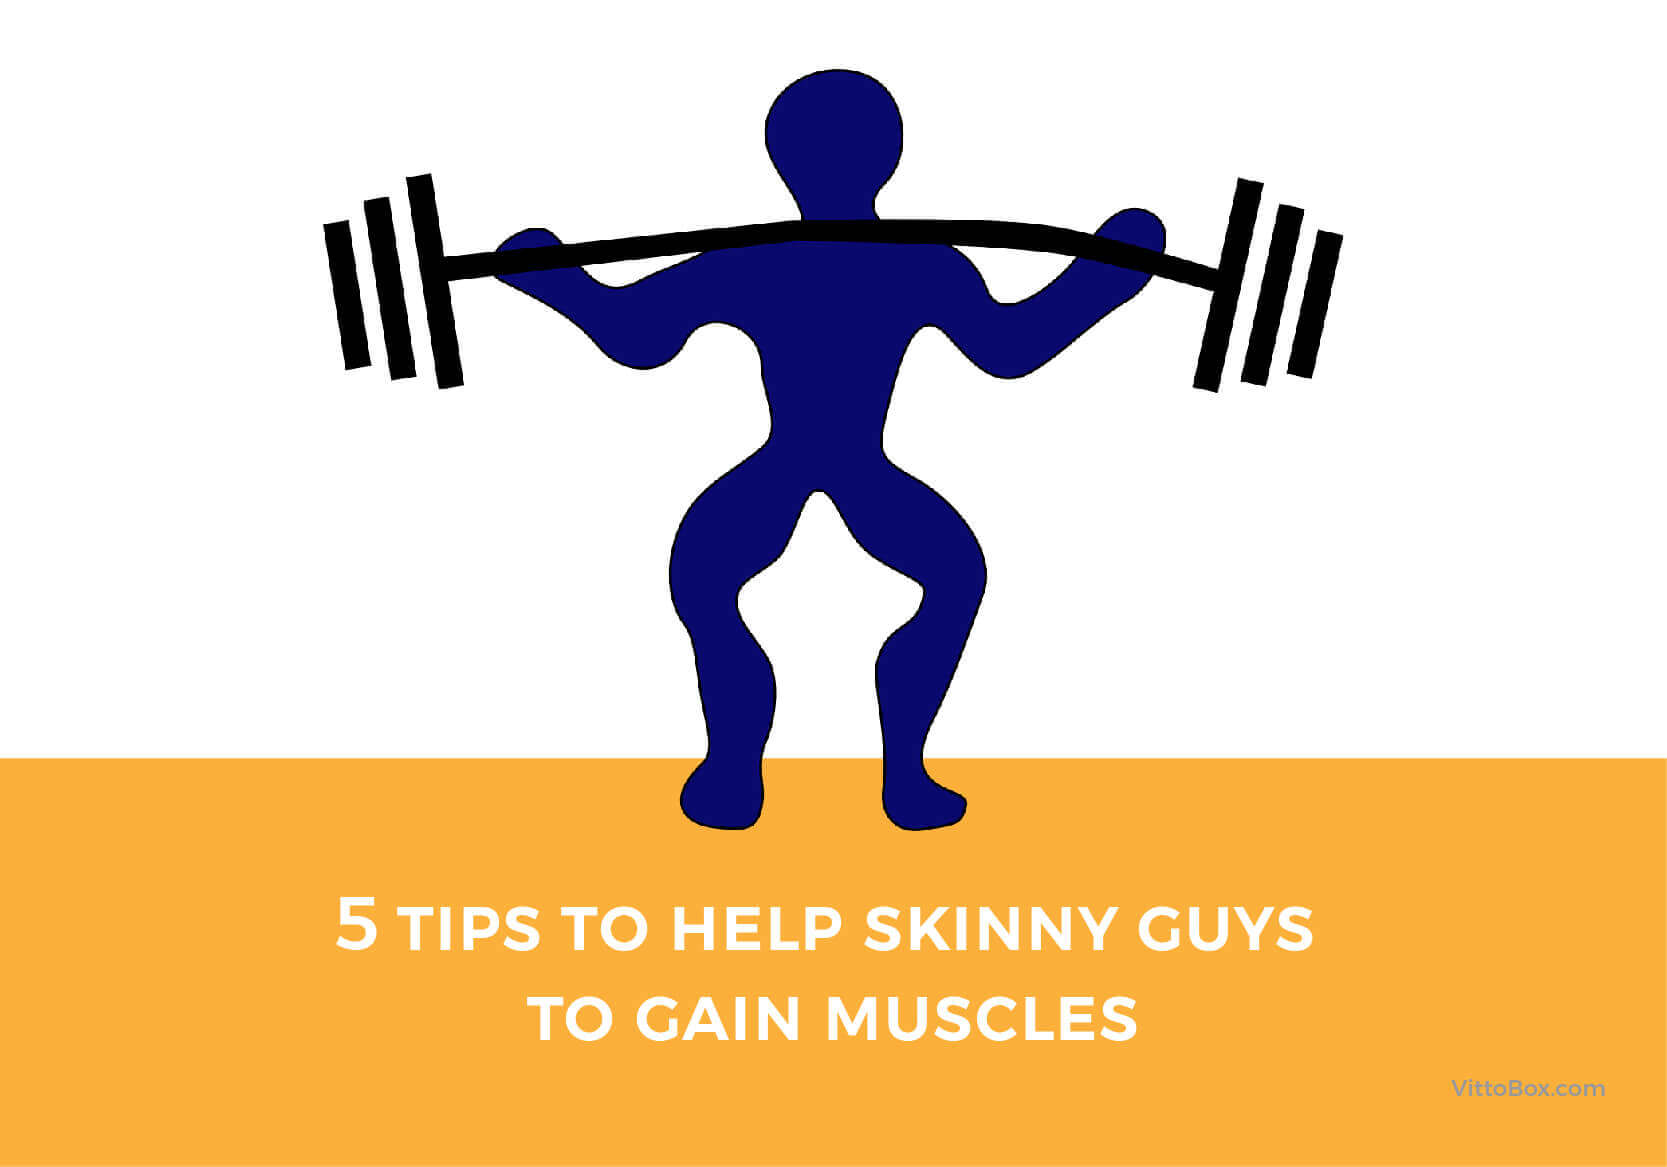 5 Tips To Help Skinny Guys To Gain Muscles